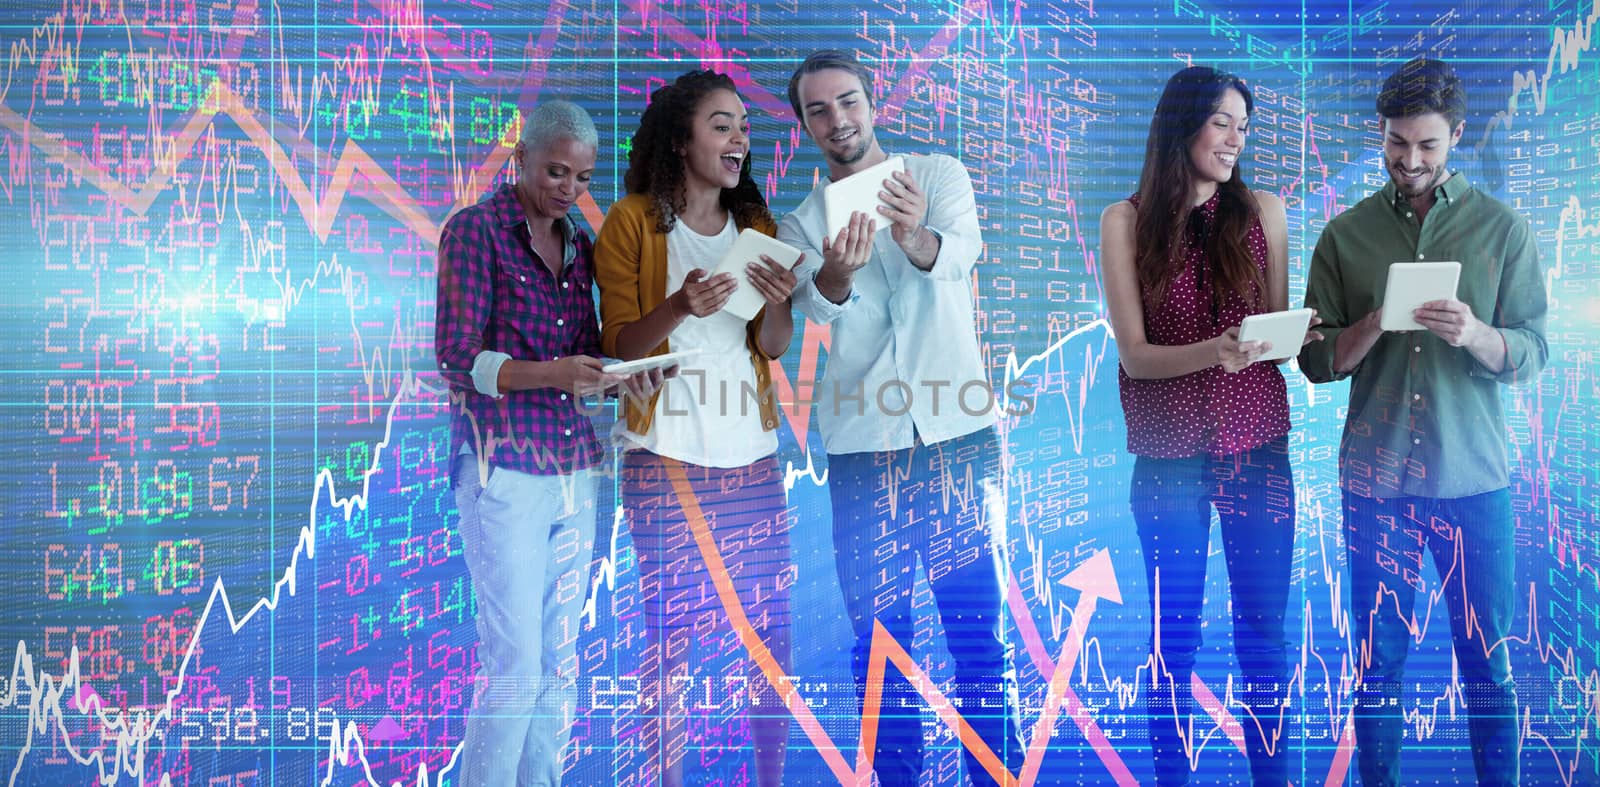 Business people discussing over tablet against white background against stocks and shares